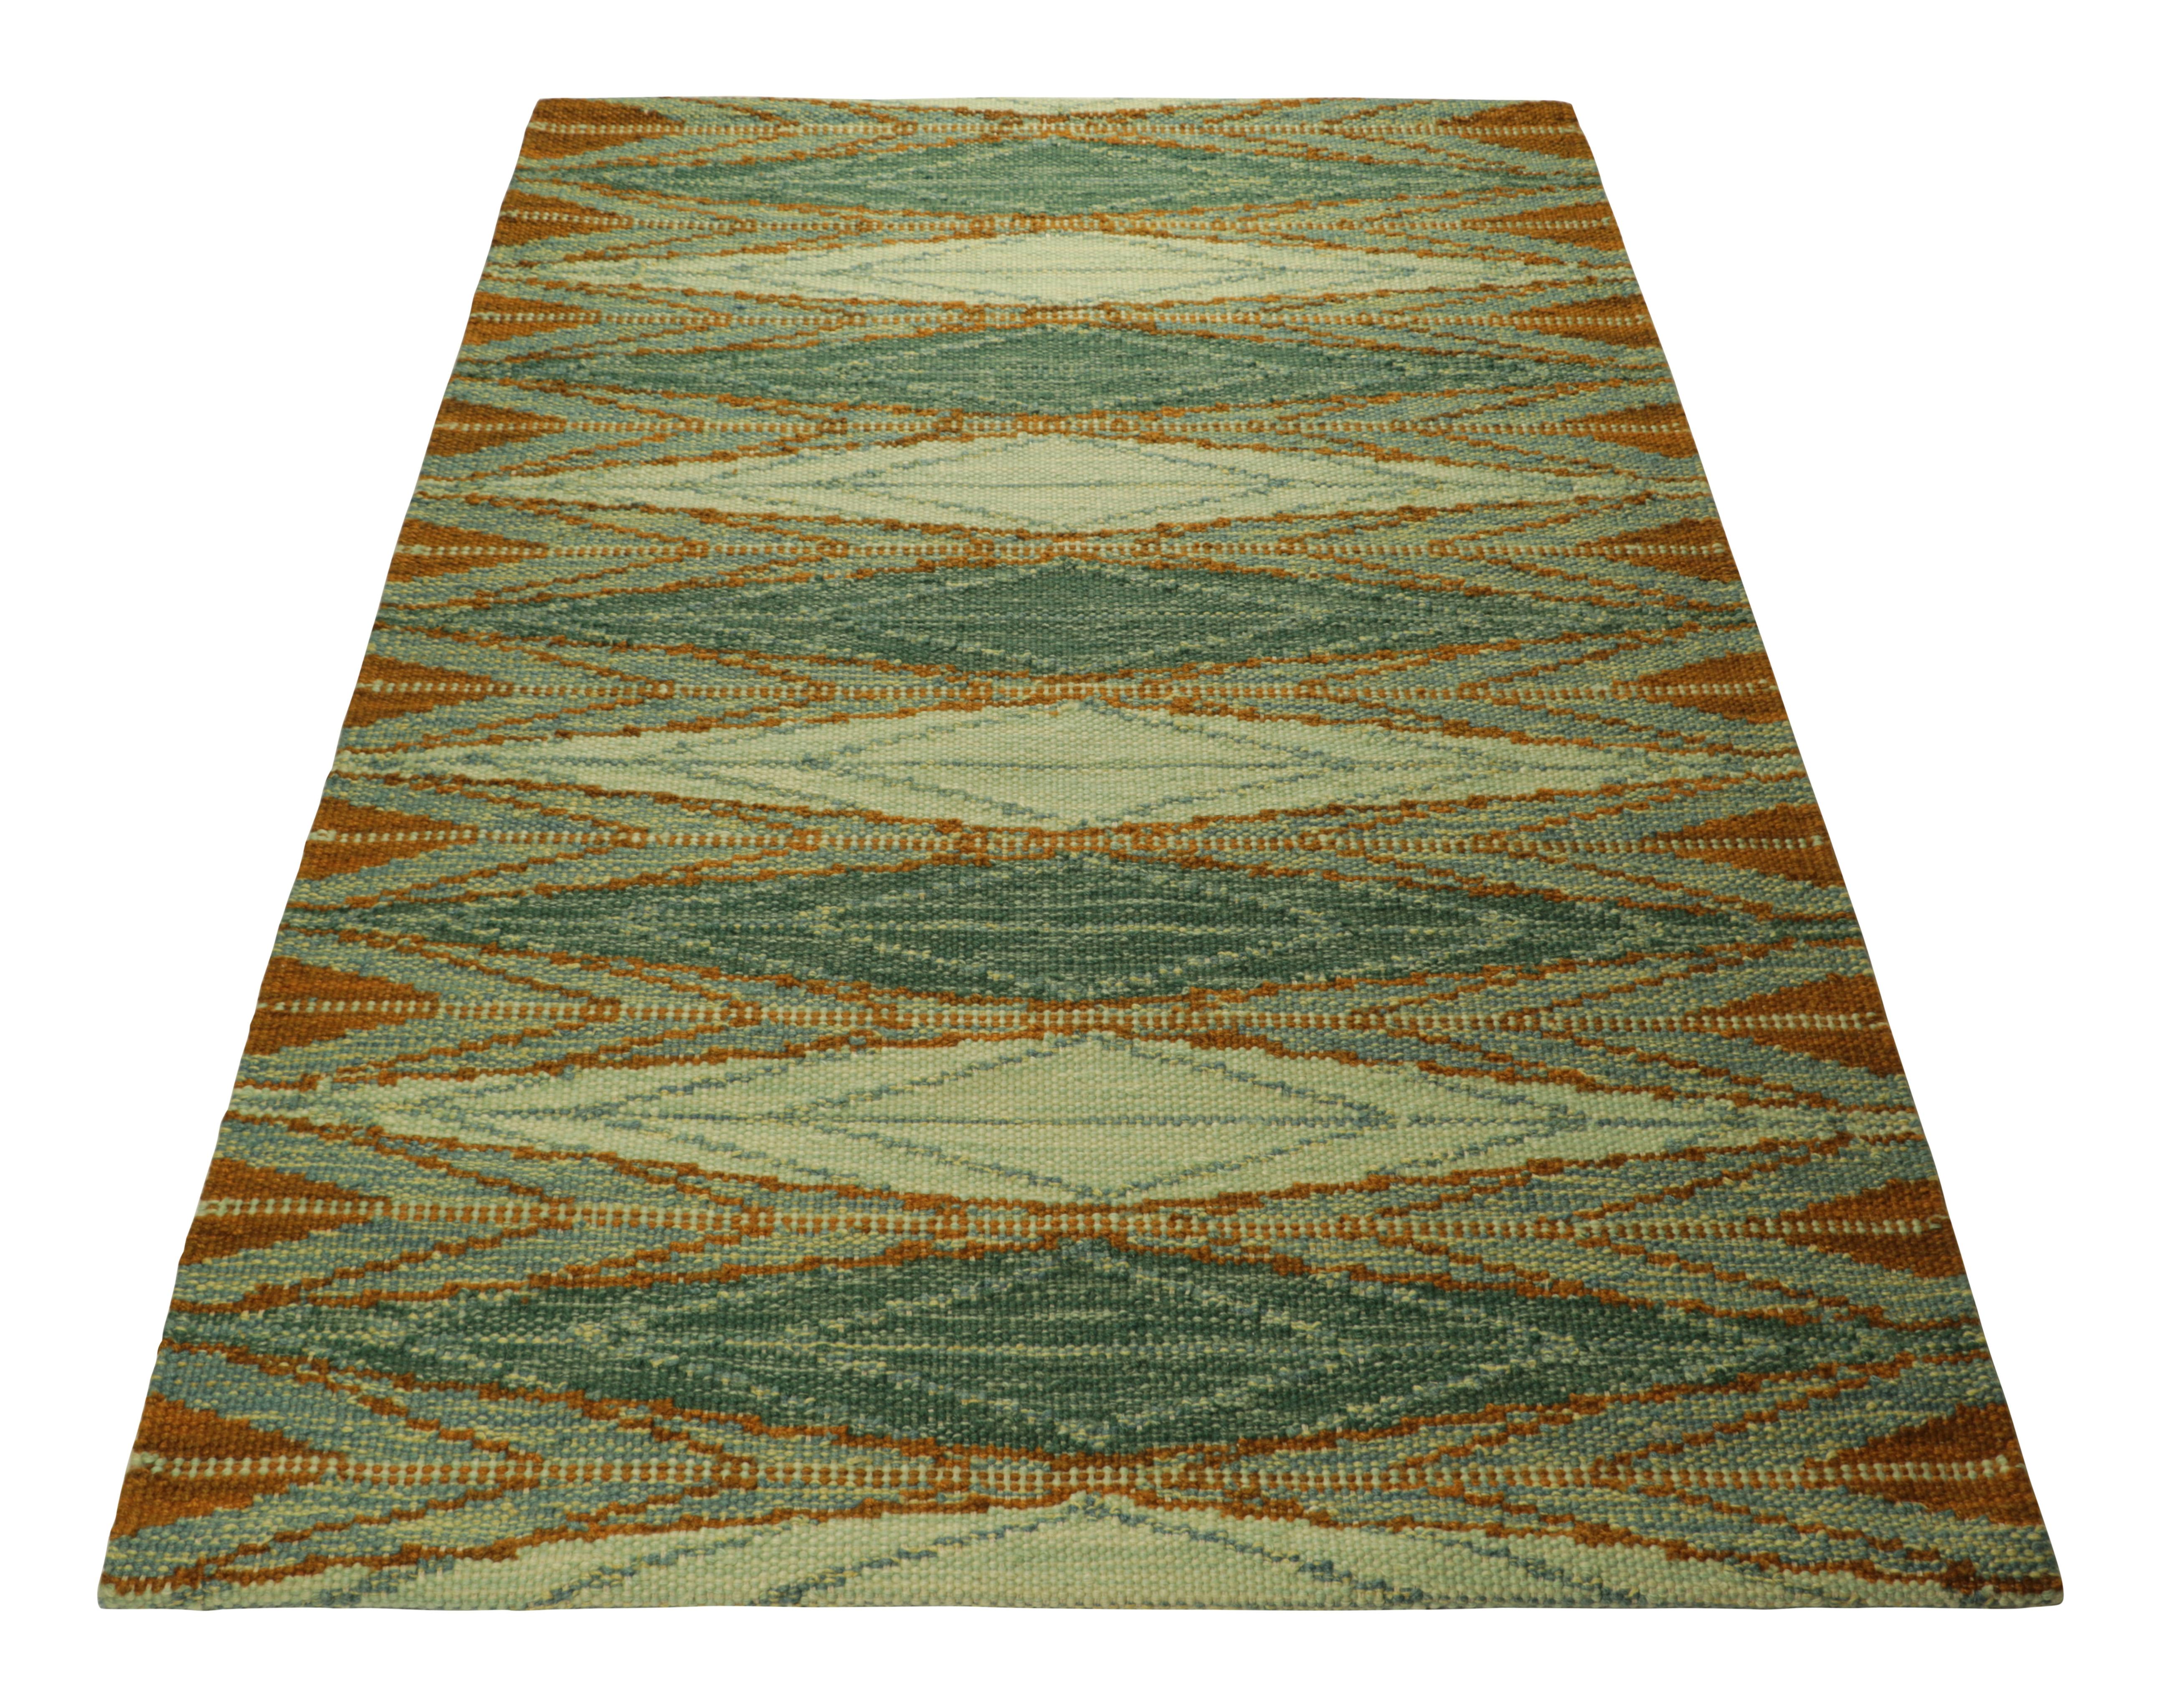 Indian Rug & Kilim’s Scandinavian Style Rug in Green, with Orange Geometric Patterns For Sale